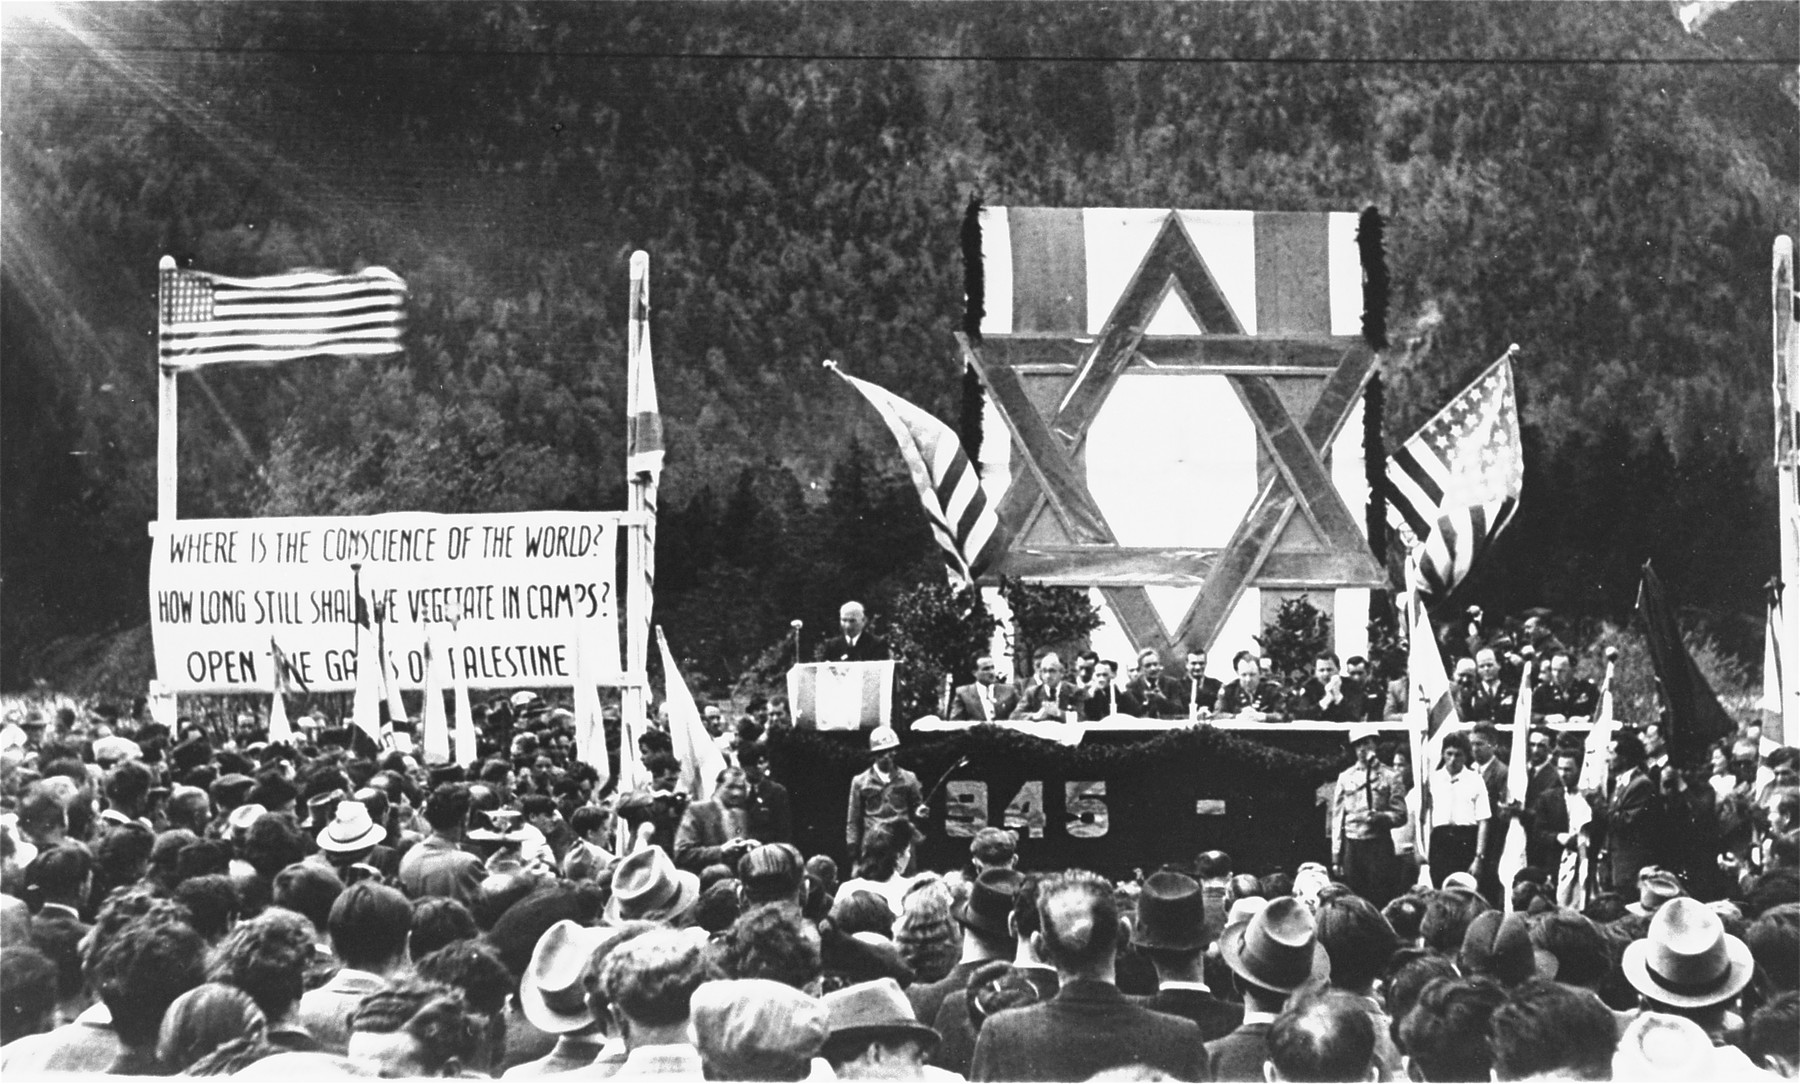 David Treger, President of the Central Committee of the Liberated Jews in Bavaria, delivers an address at a public meeting held in the Mittenwald displaced persons camp to protest British immigration policy in Palestine.  

The banners call for free immigration to Palestine.